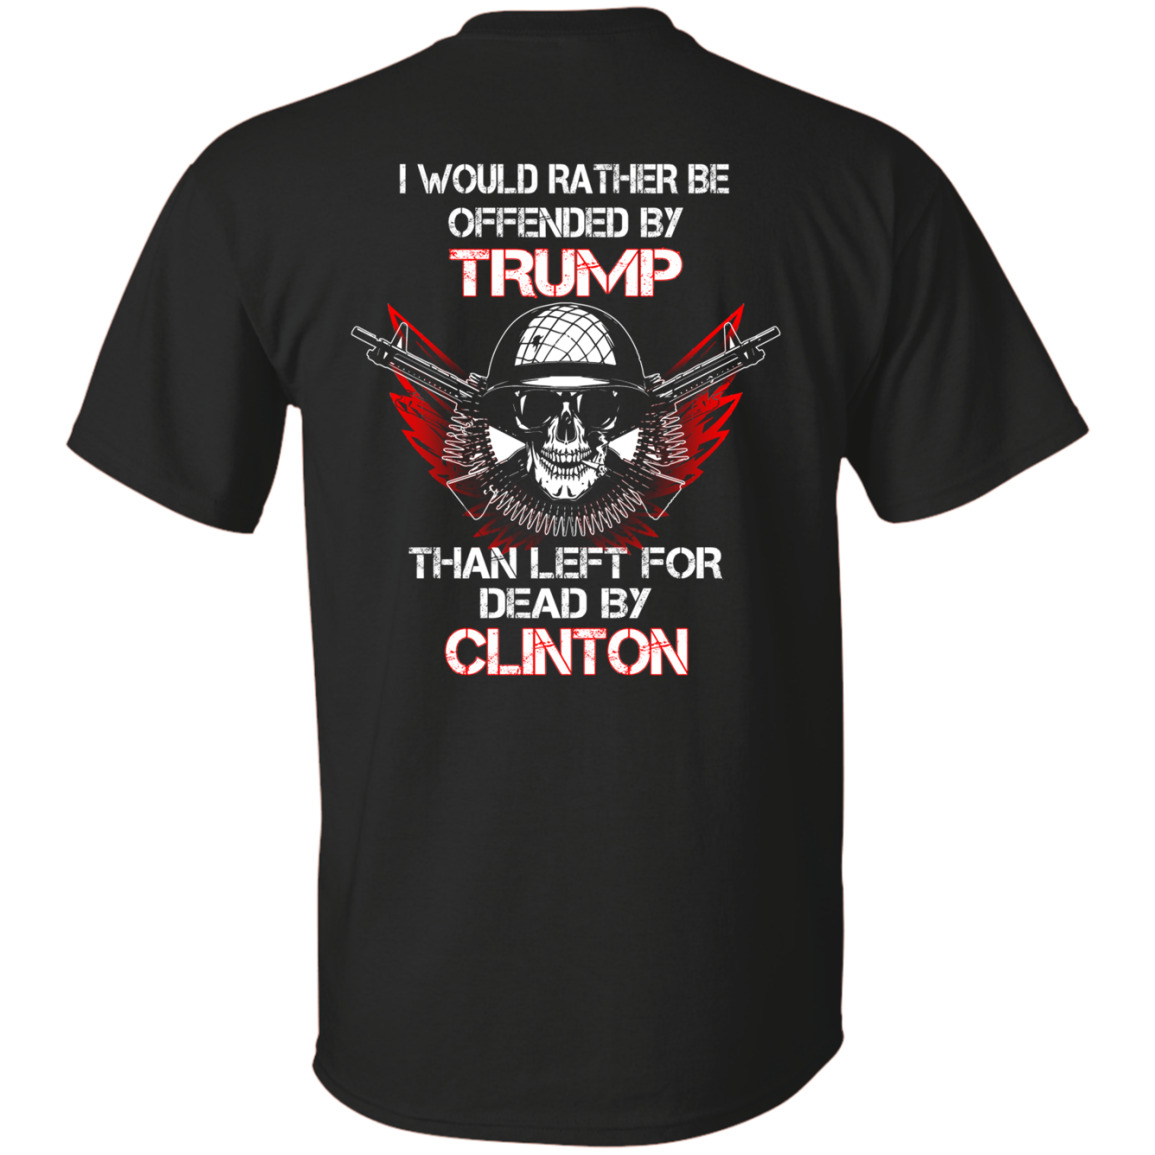 I would rather be offended by Trump than left for dead by Clinton shirt, hoodie